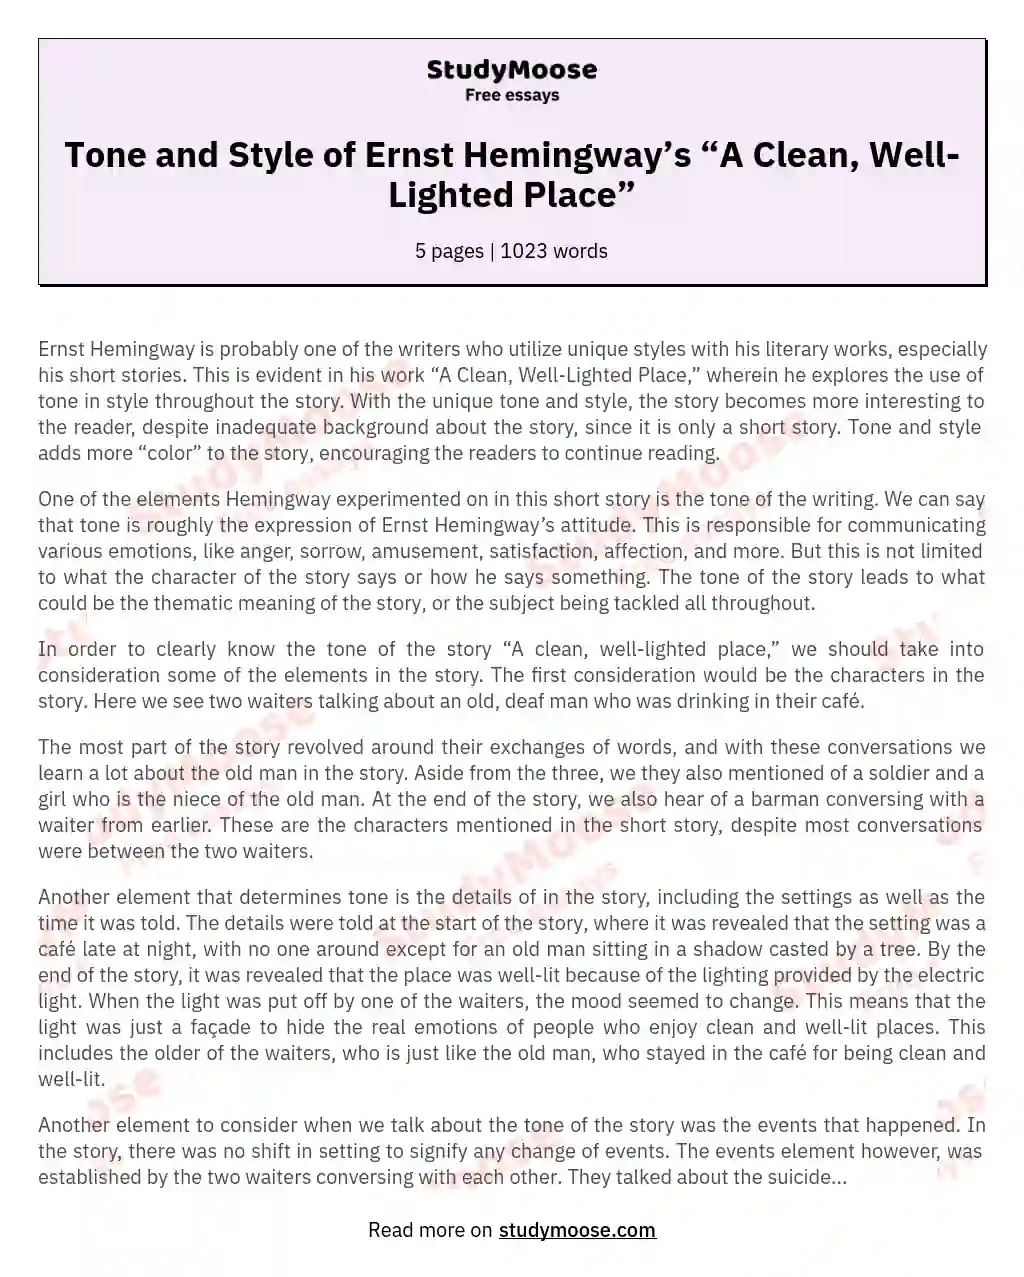 Tone and Style of Ernst Hemingway’s “A Clean, Well-Lighted Place” essay